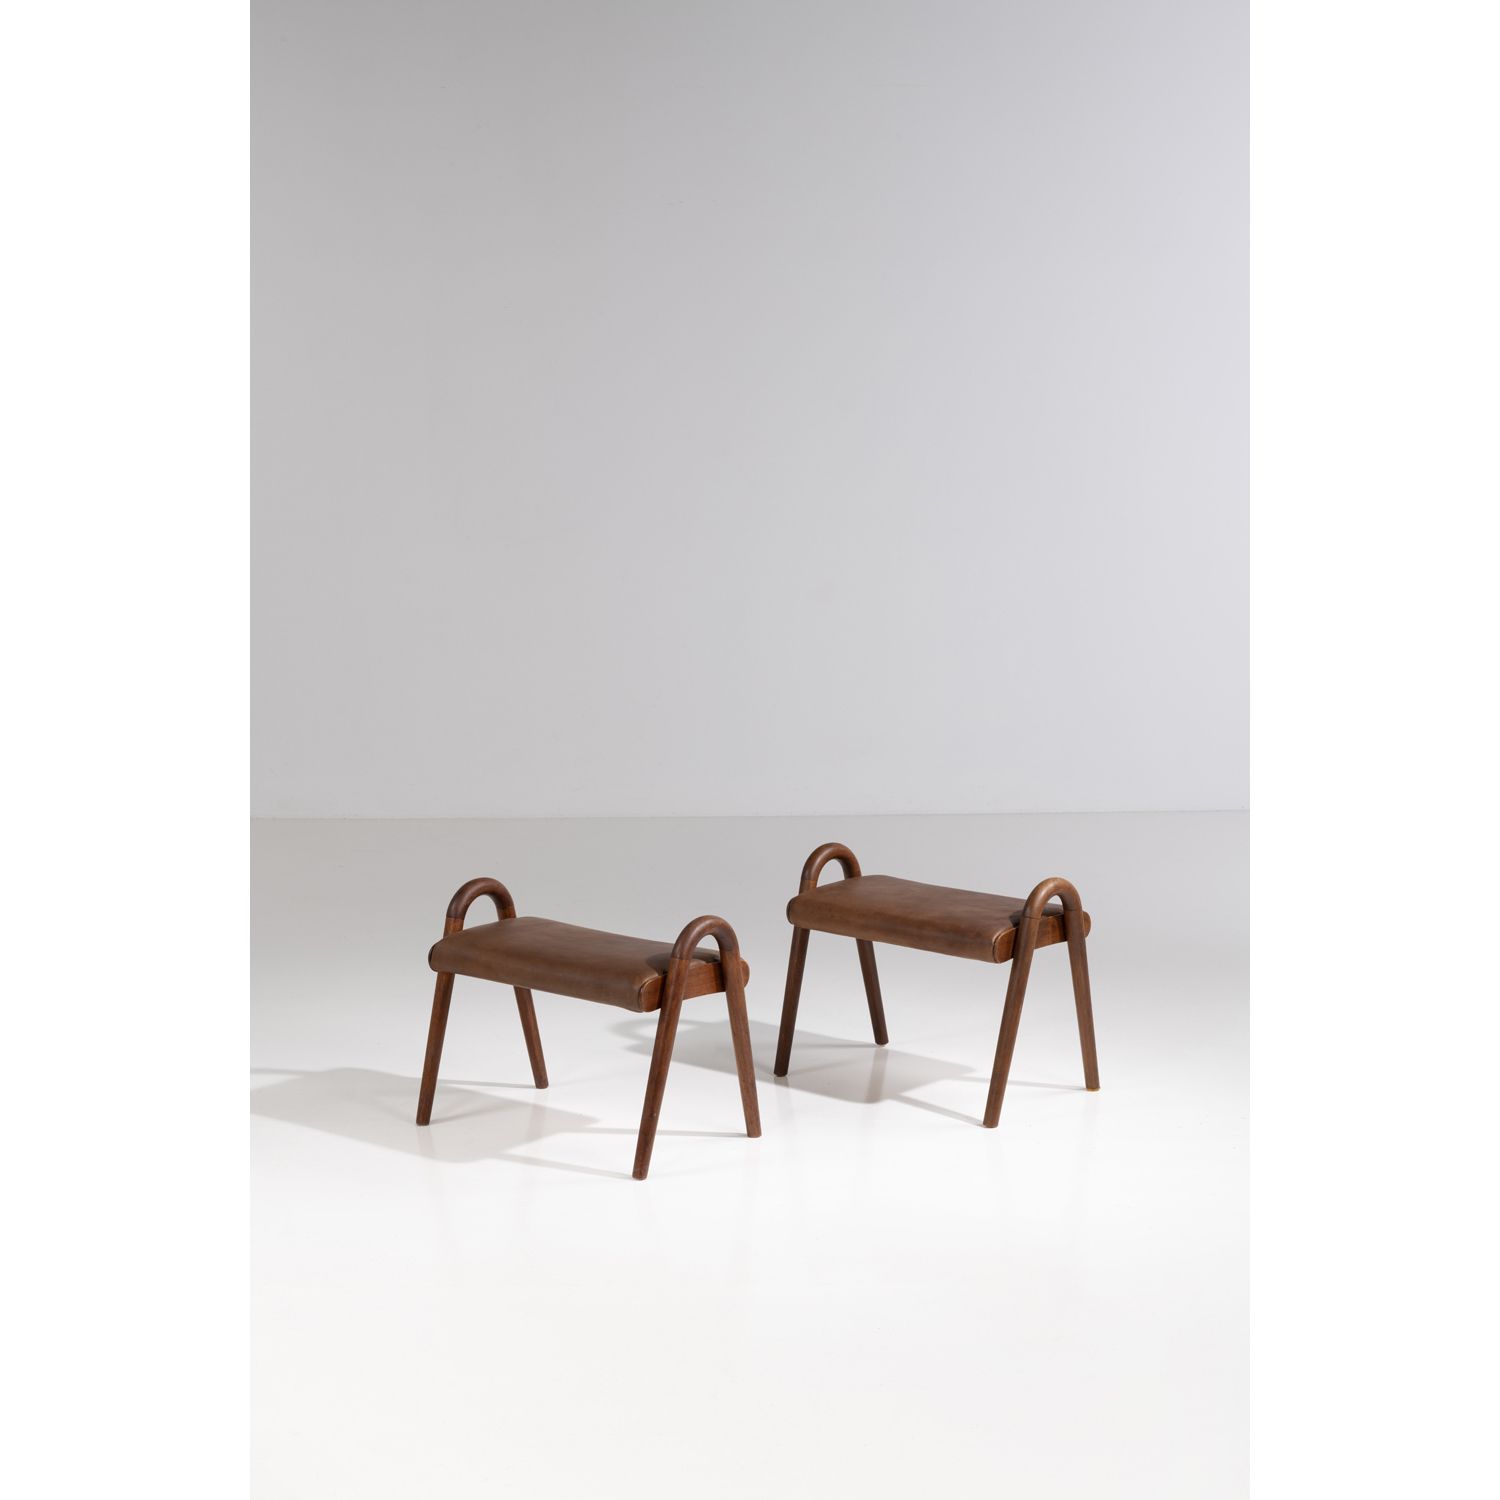 Null Wilhelm Lauritzen (1894-1984)

Pair of stools

Teak and leather

Edited by &hellip;